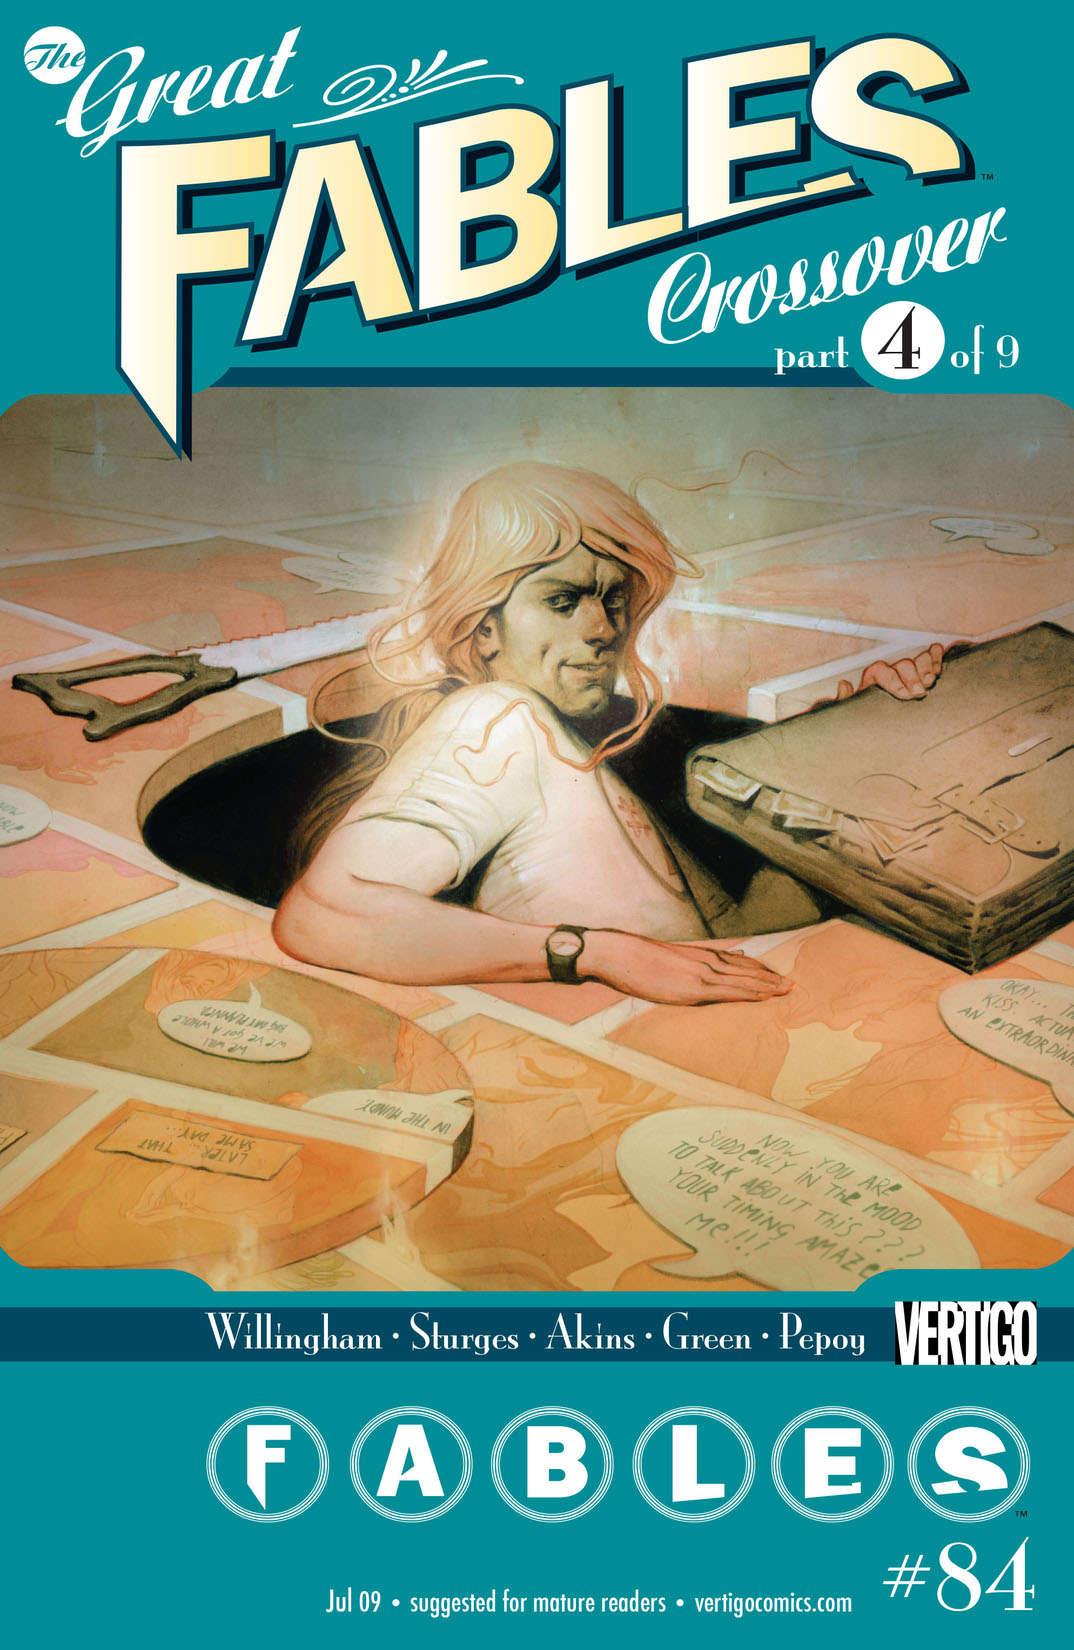 Fables #84 preview images